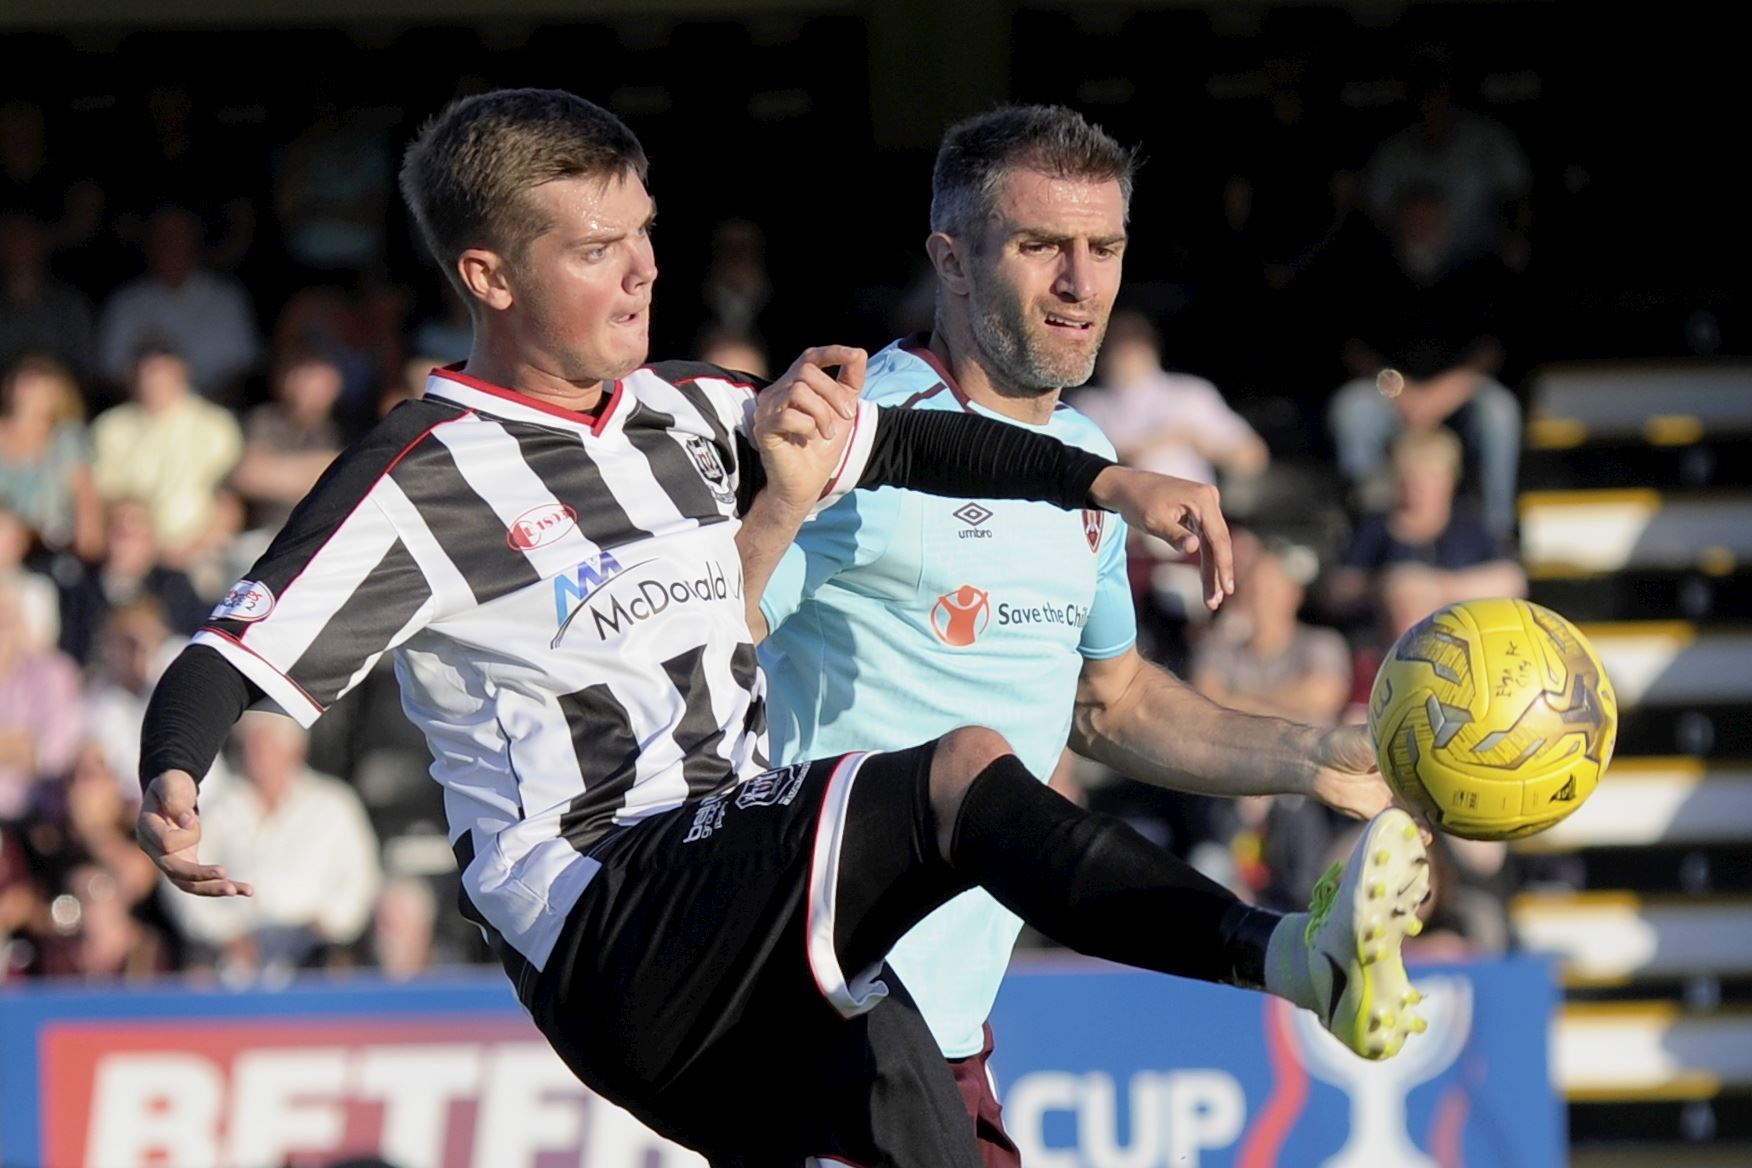 Thomas Reilly challenges Hearts’ Aaron Hughes during his spell at Elgin City in 2017. Next term he could play against Elgin in a Kelty Hearts shirt. Picture: Daniel Forsyth